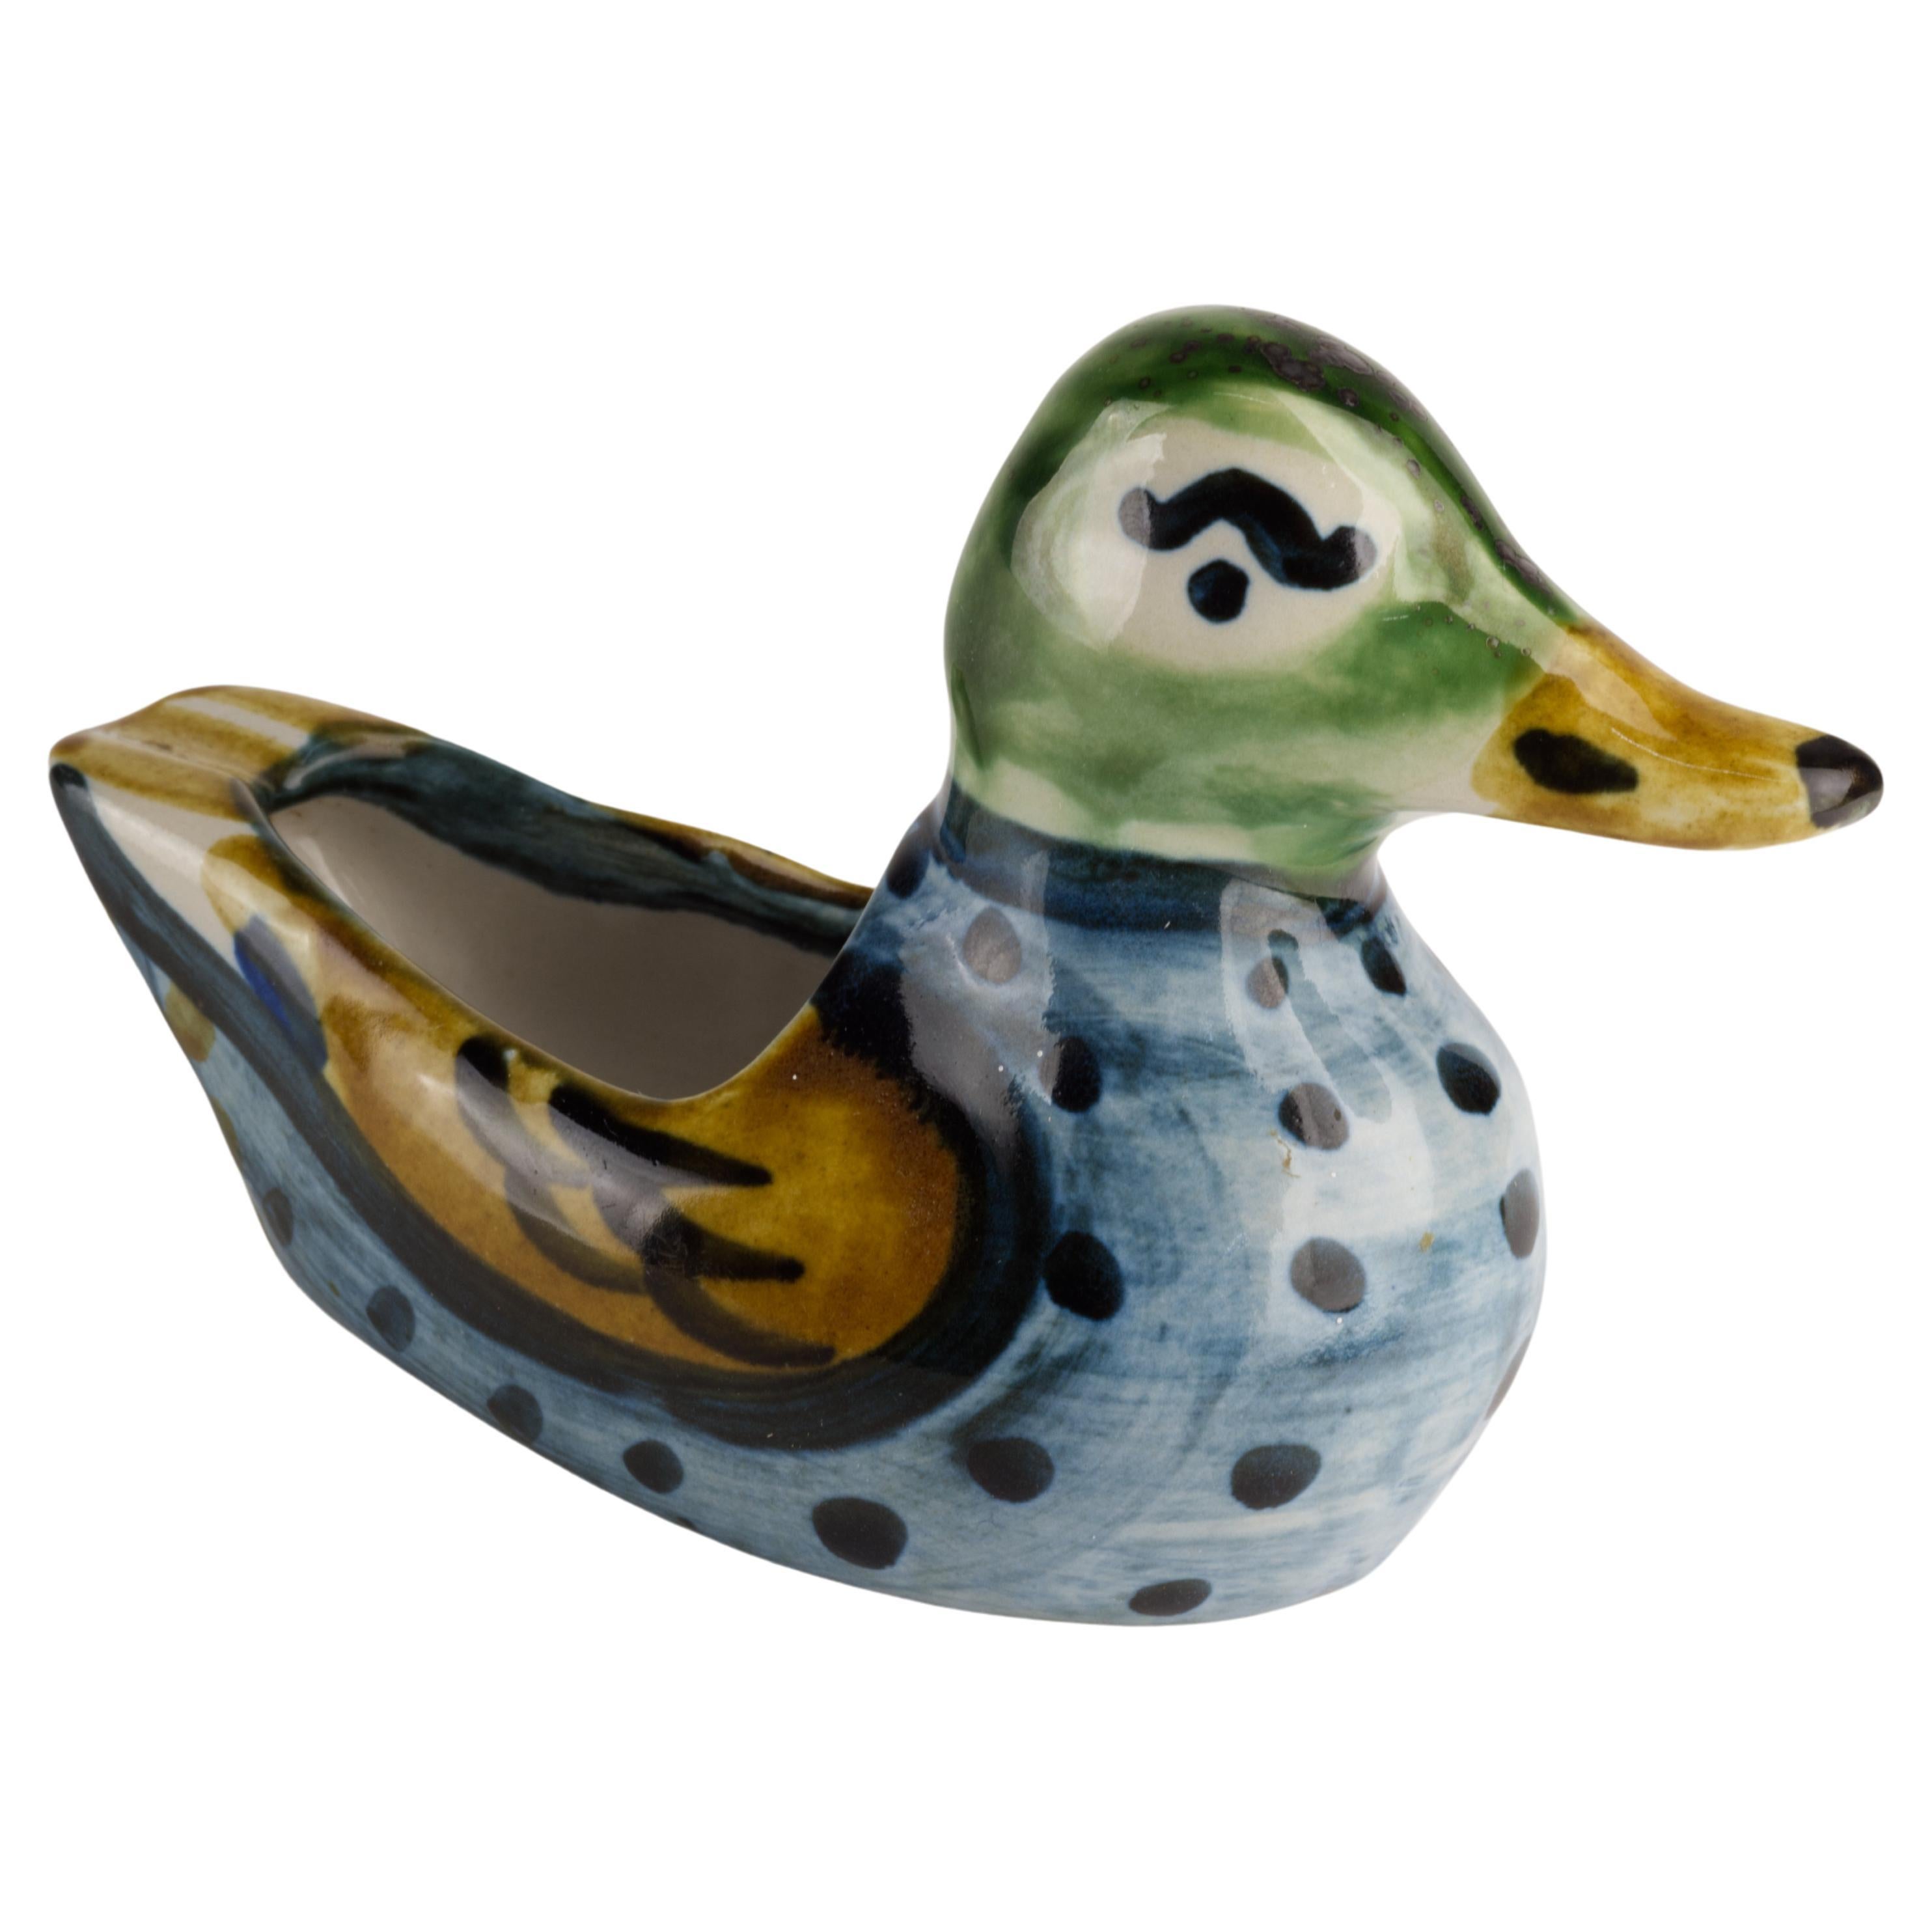 M.A. Hadley Pottery Hand Painted Duck Figurine Ashtray or Catchall